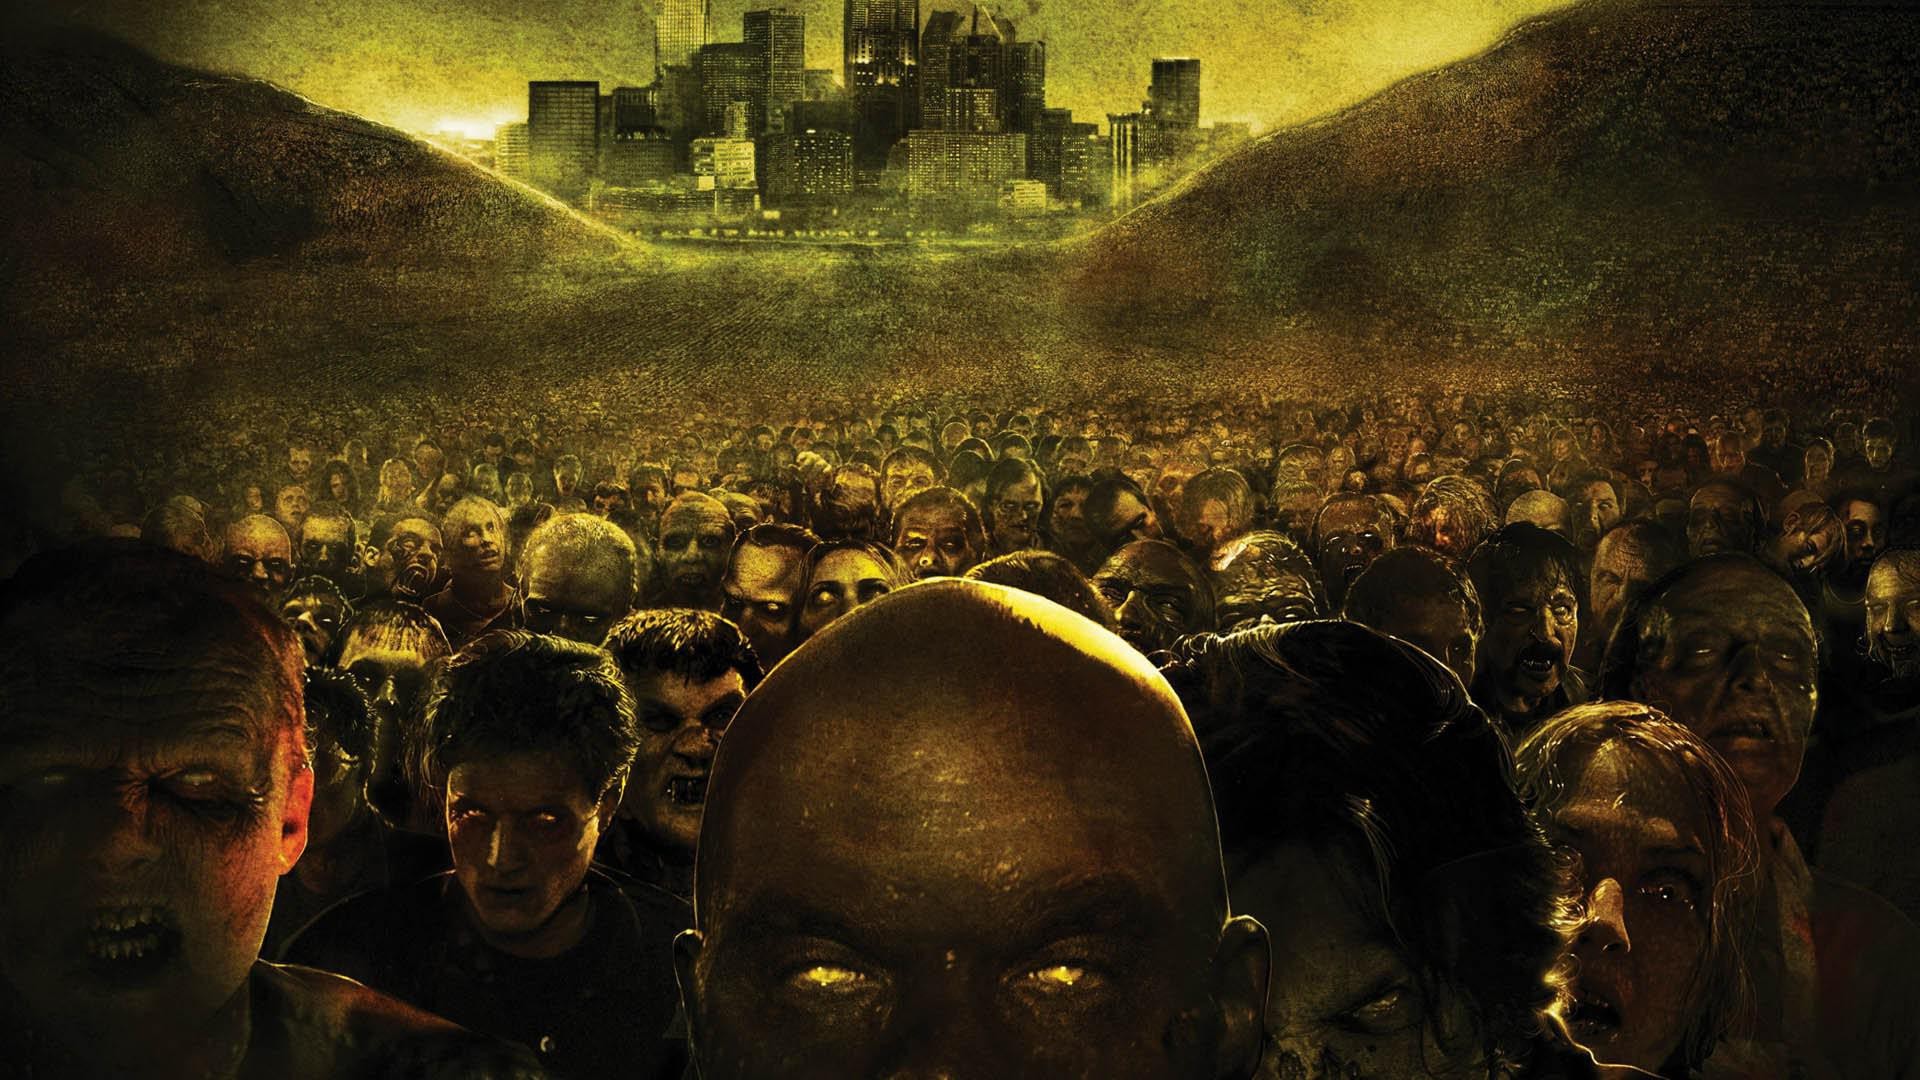  Zombies  wallpaper    Download free cool full HD  